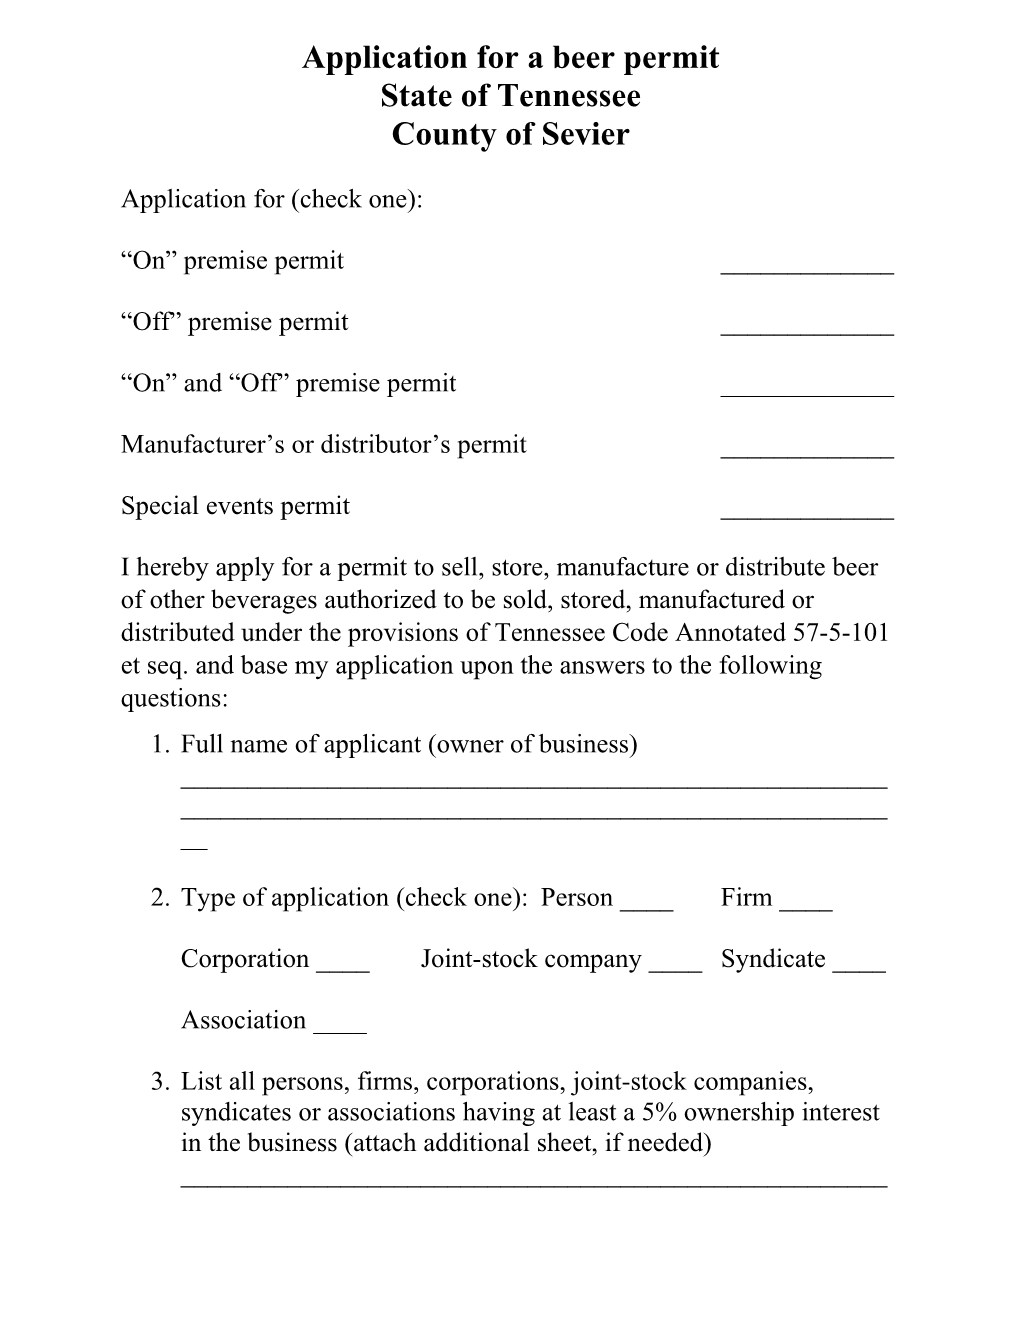 Application for a Beer Permit